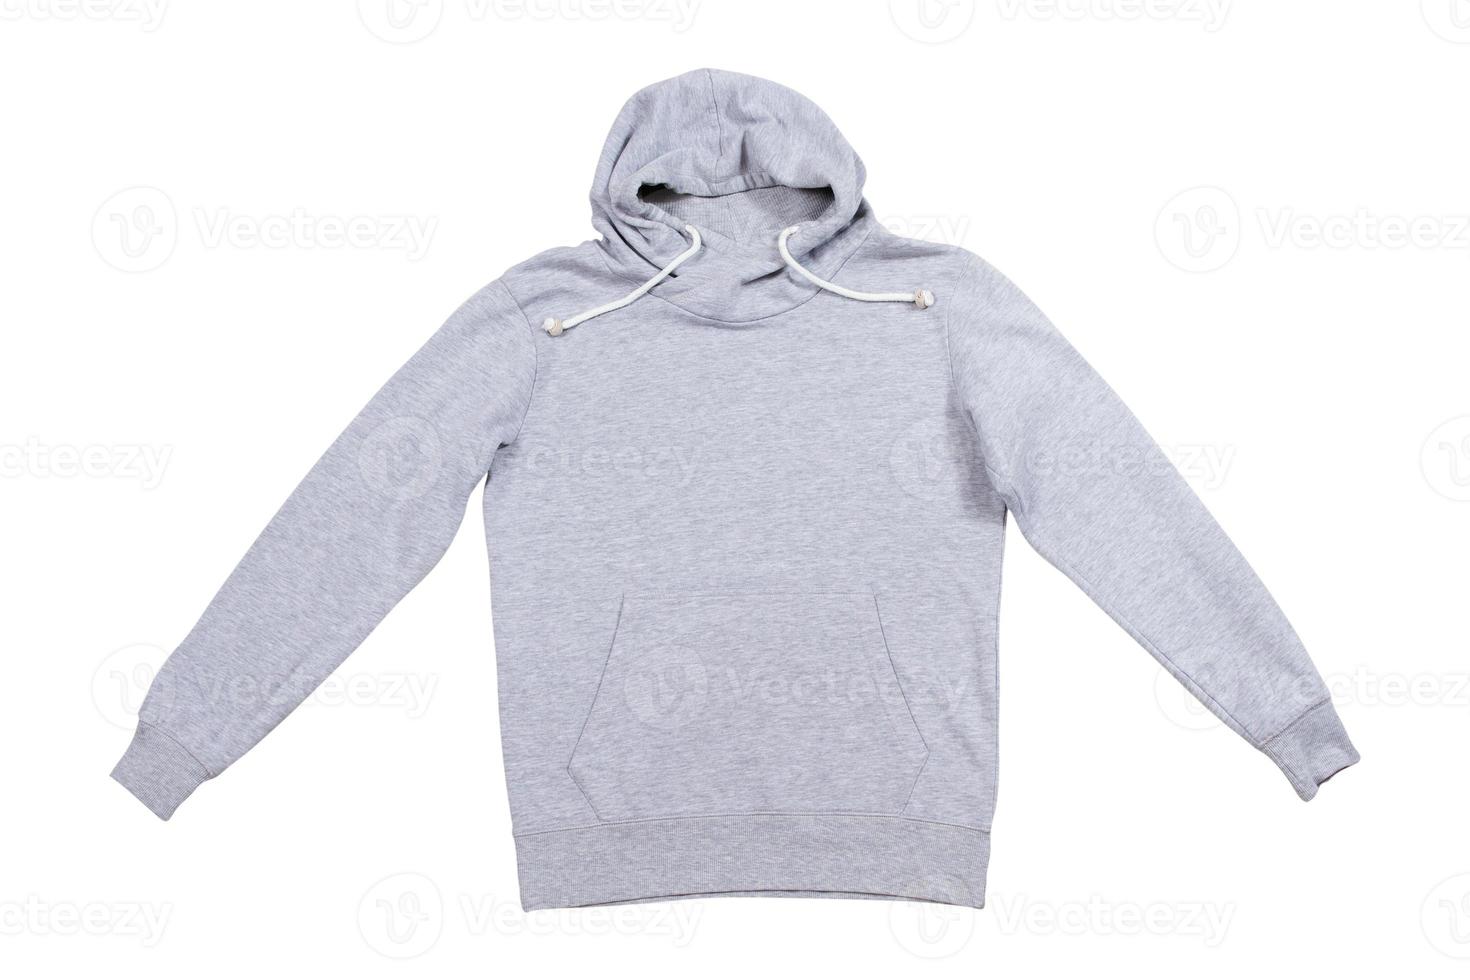 gray sweatshirt with a hood on a white background isolated copy space, empty hoody photo